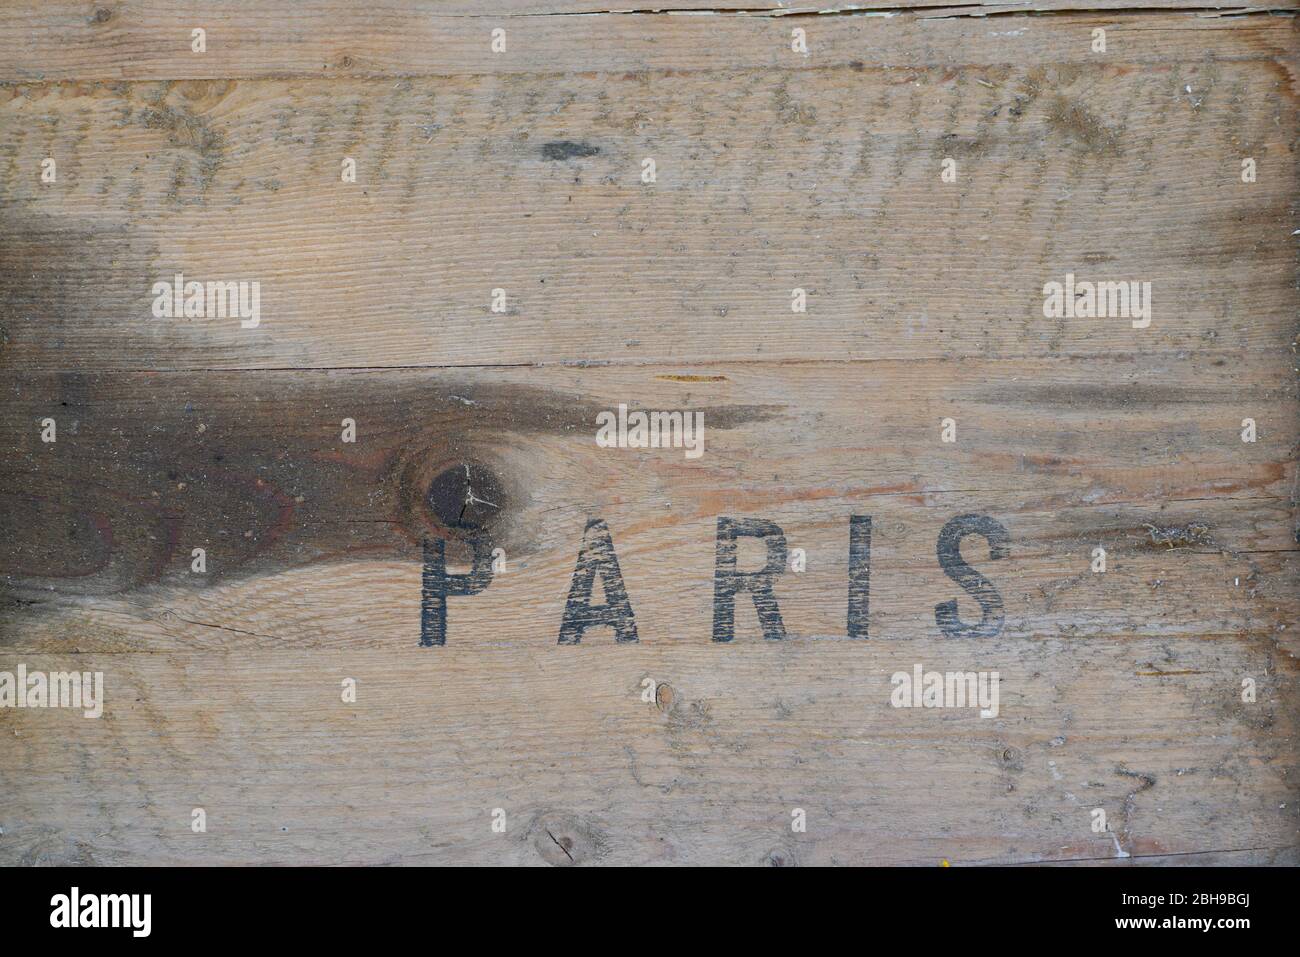 Paris stamp paint word letters on wood transport box vintage wooden background Stock Photo